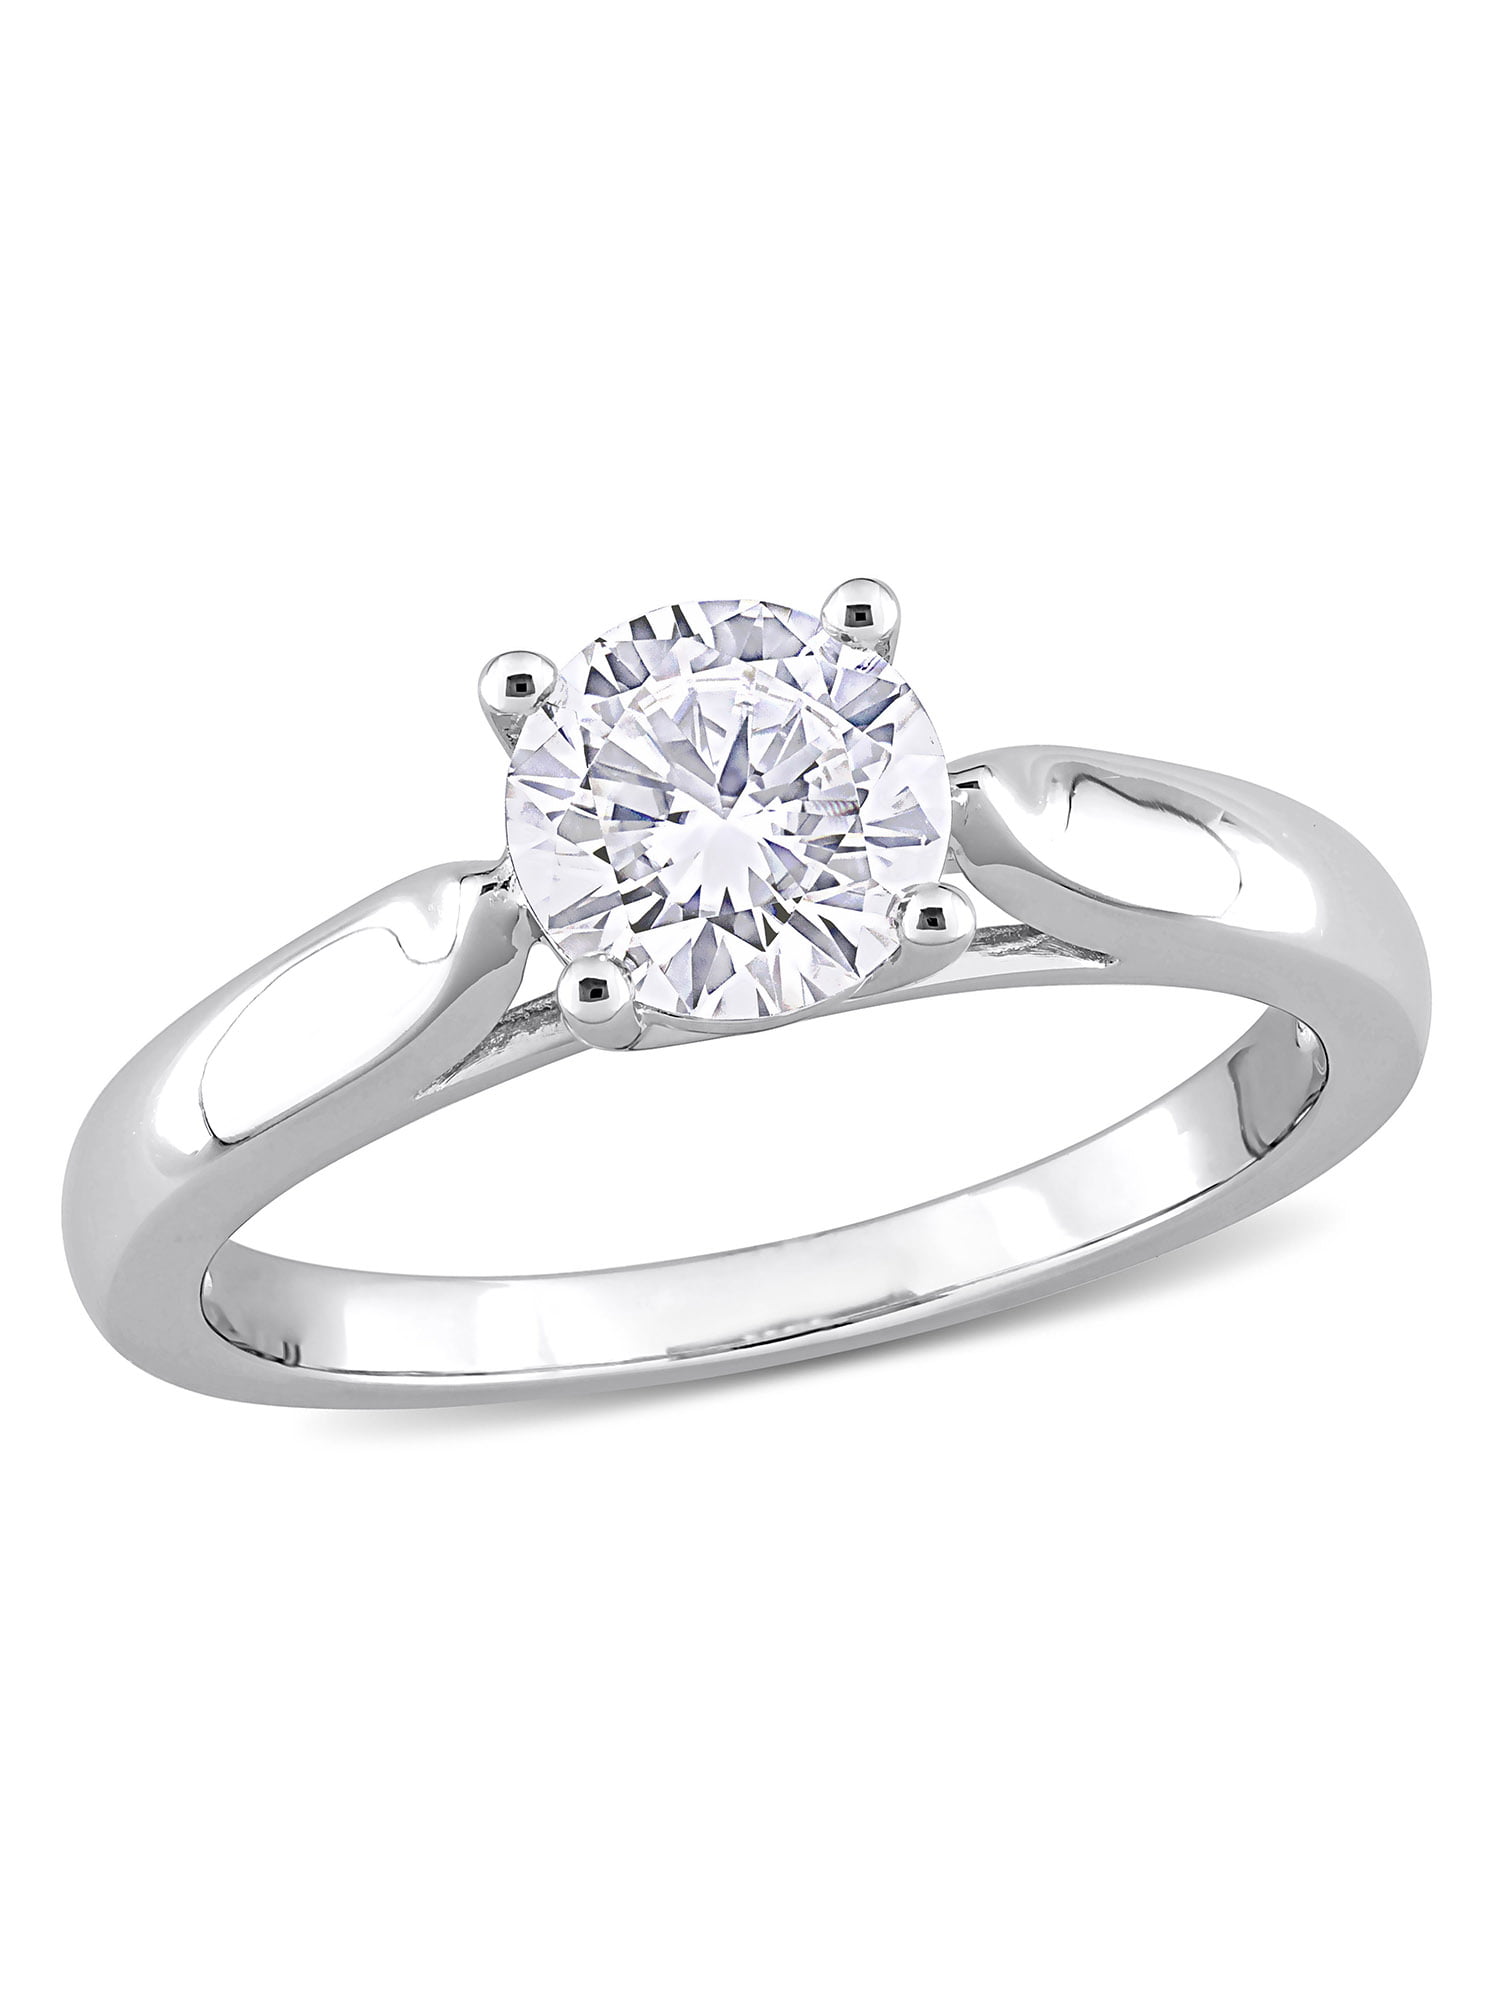 1 Carat Moissanite Ring with 925 Sterling Silver Band M101